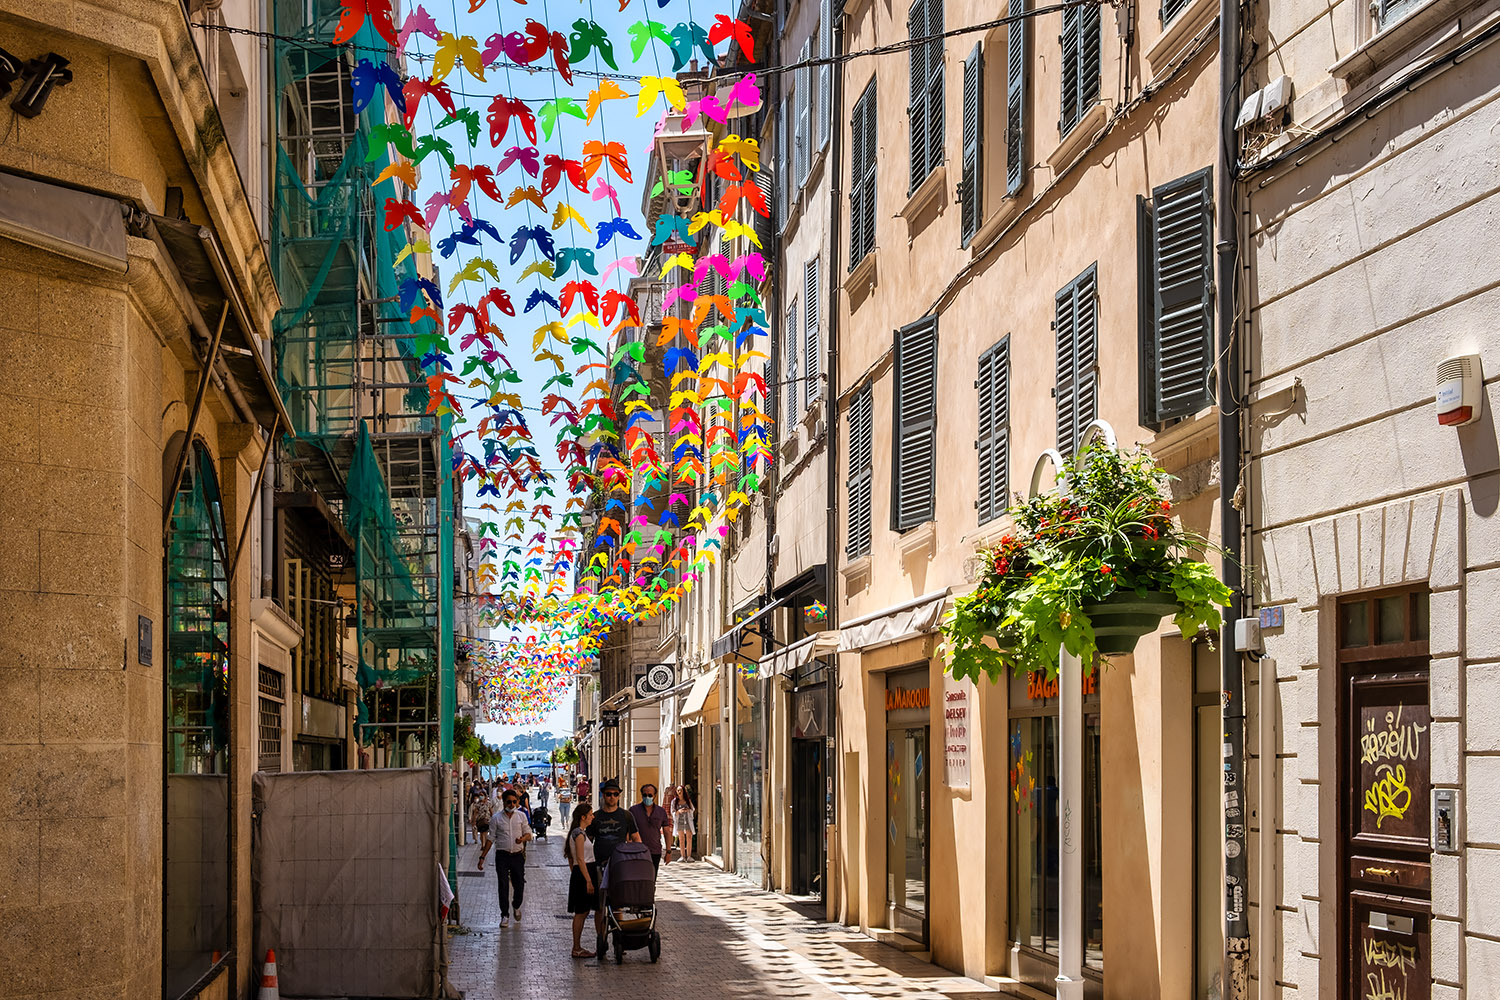 Many streets in the old town are decorated wit these colorful butterflies